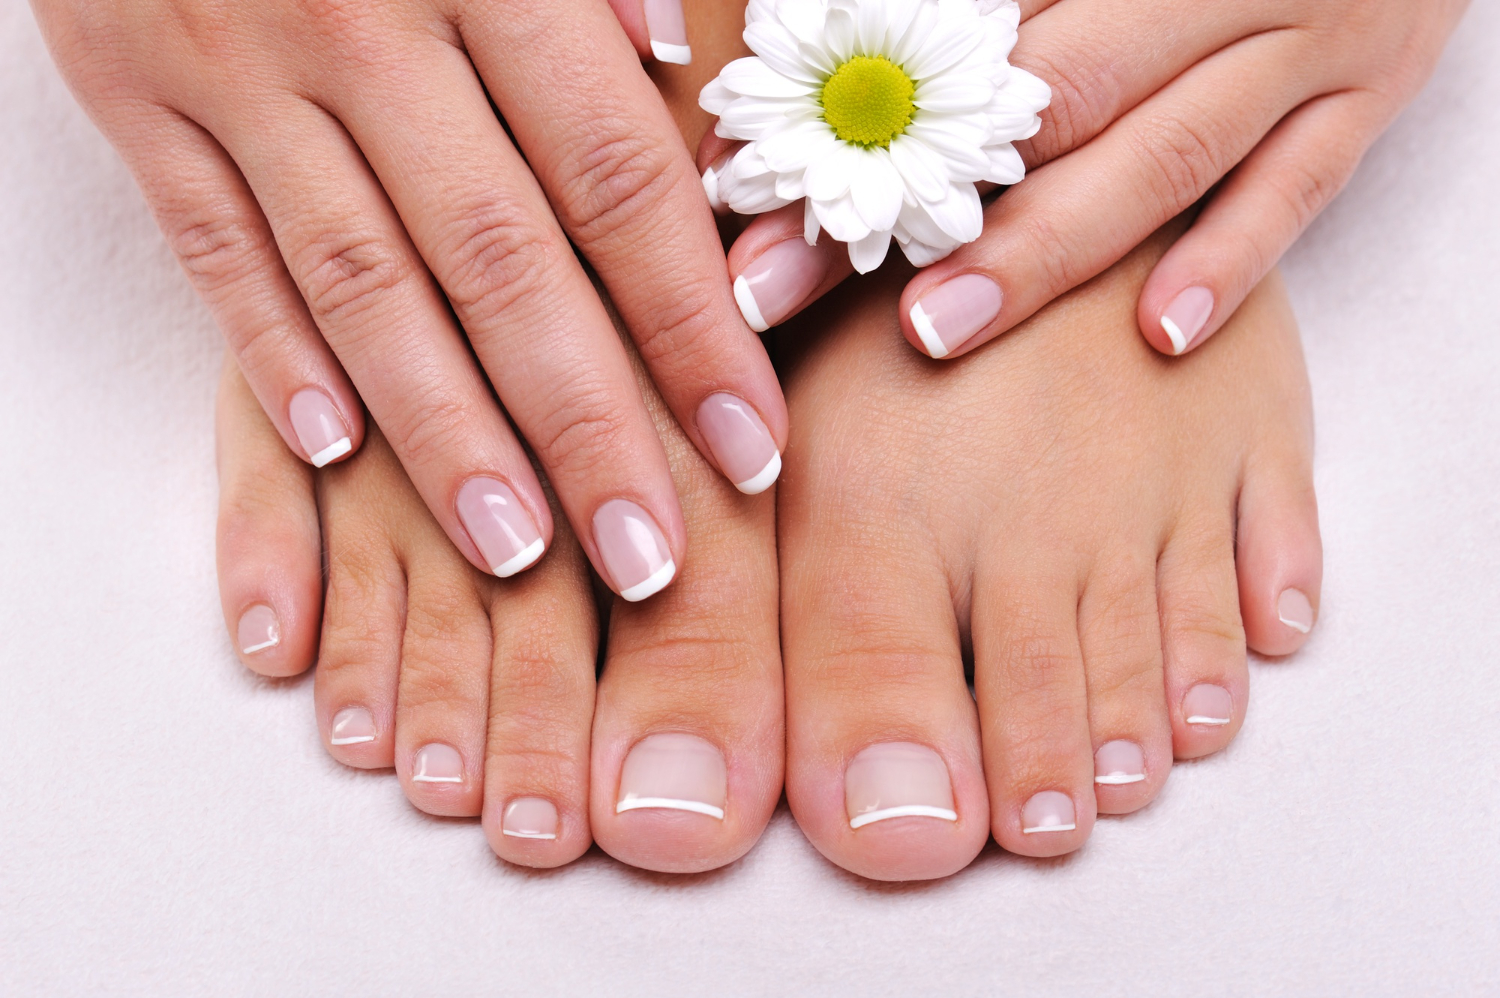 Top Guelph Nail Salons: Manicures, Pedicures, Gel Nails & More!